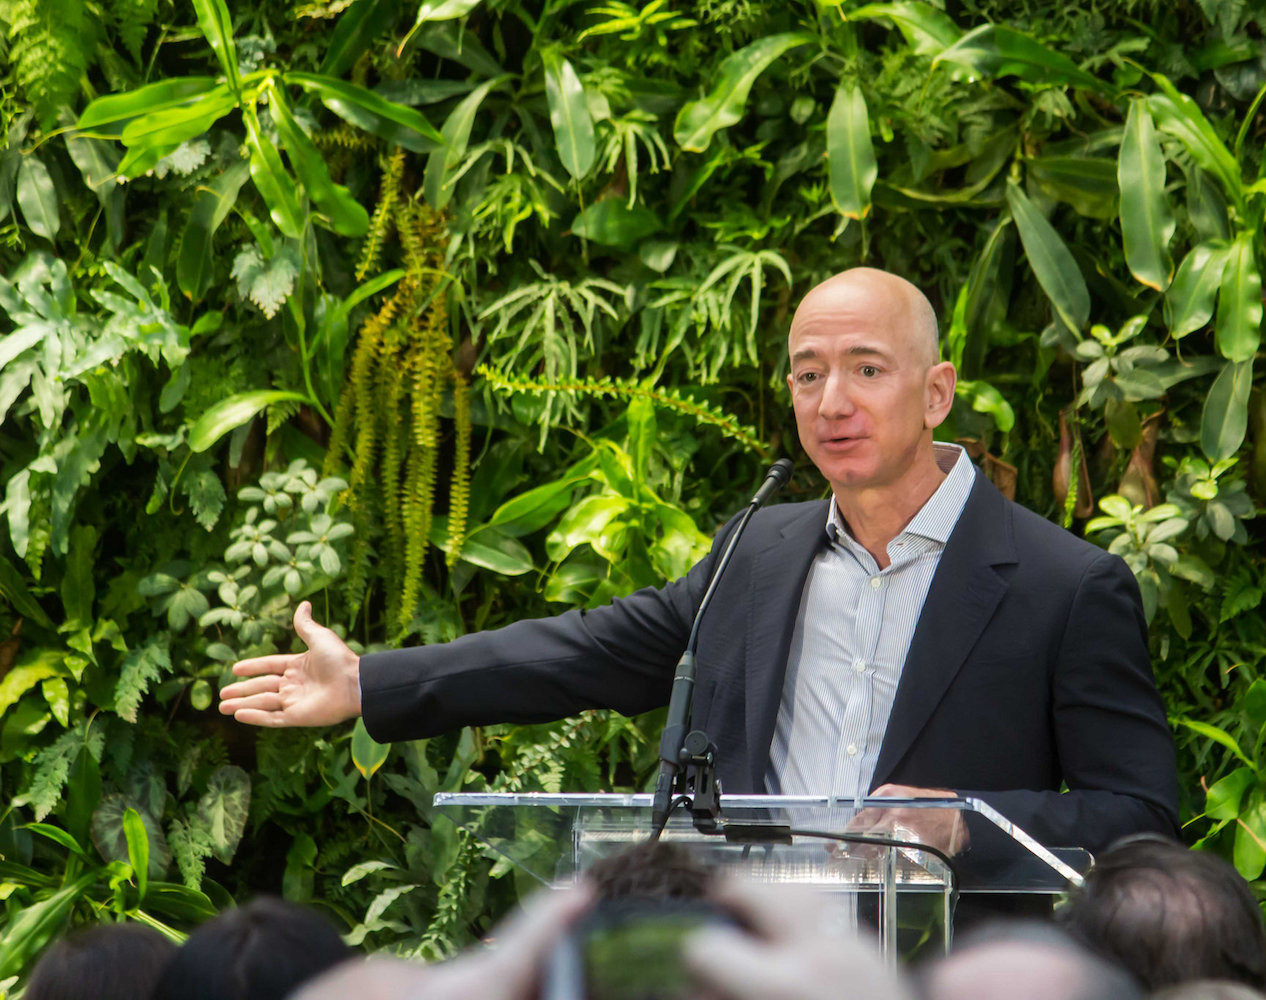 Jeff Bezos is likely going to announce Amazon's second headquarters within the next few days. He will likely pick Washington, DC. Credit: Seattle City Council, September 2018